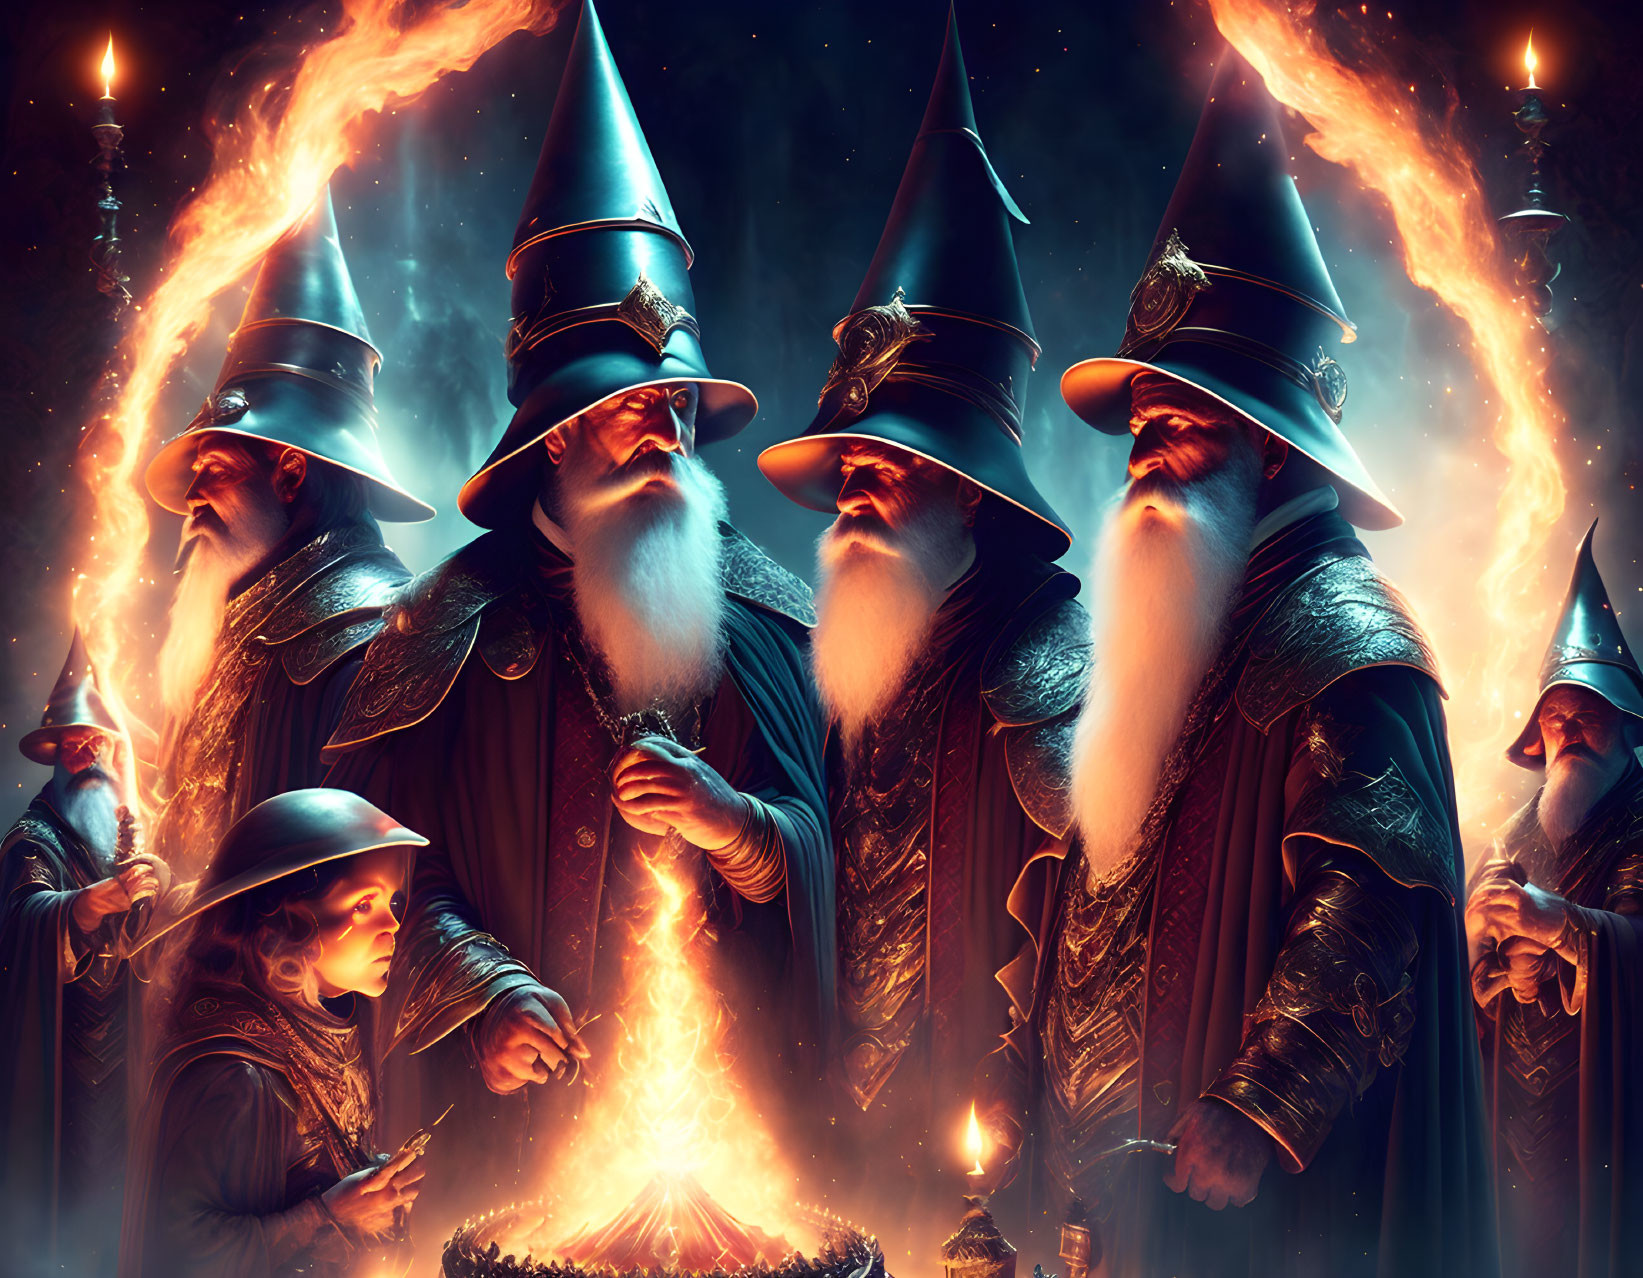 The Wizards Conclave